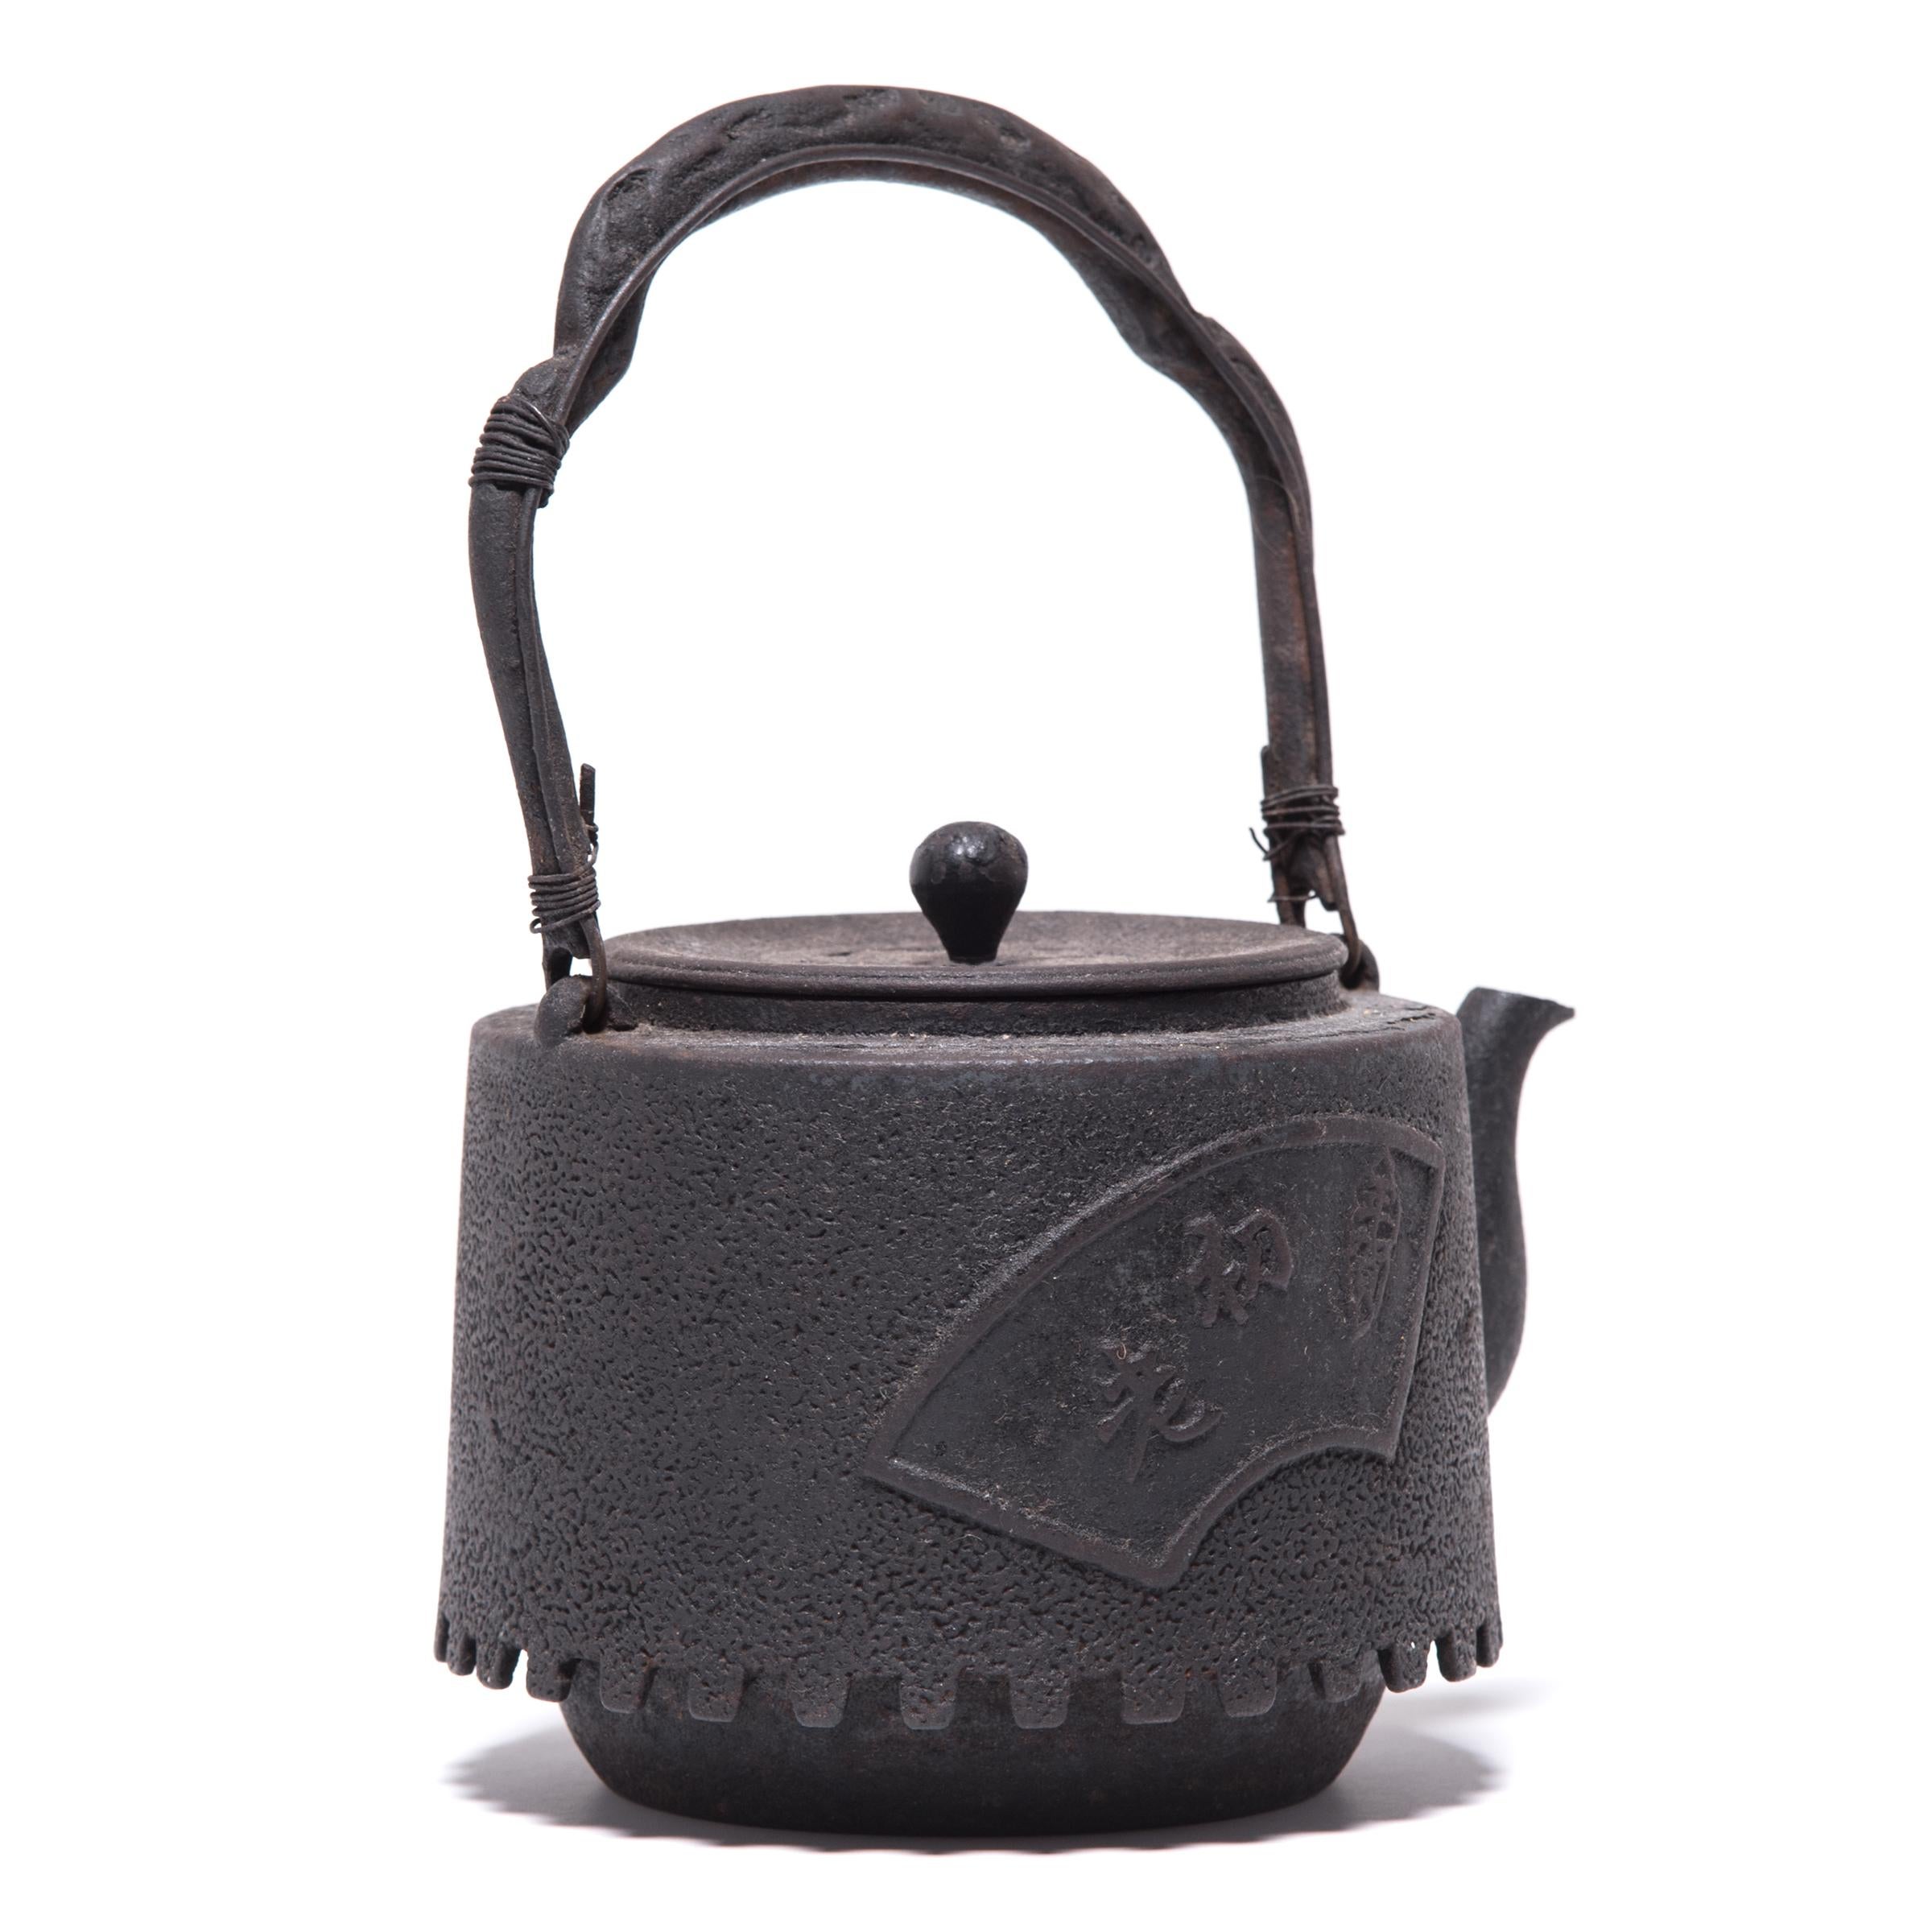 Decorated with a raised fan motif, this aptly named teapot was used to boil water for traditional tea ceremonies. Known as tetsubin, the kettle’s cast-iron construction is said to change the quality of the water, making tea taste mellow and sweet.